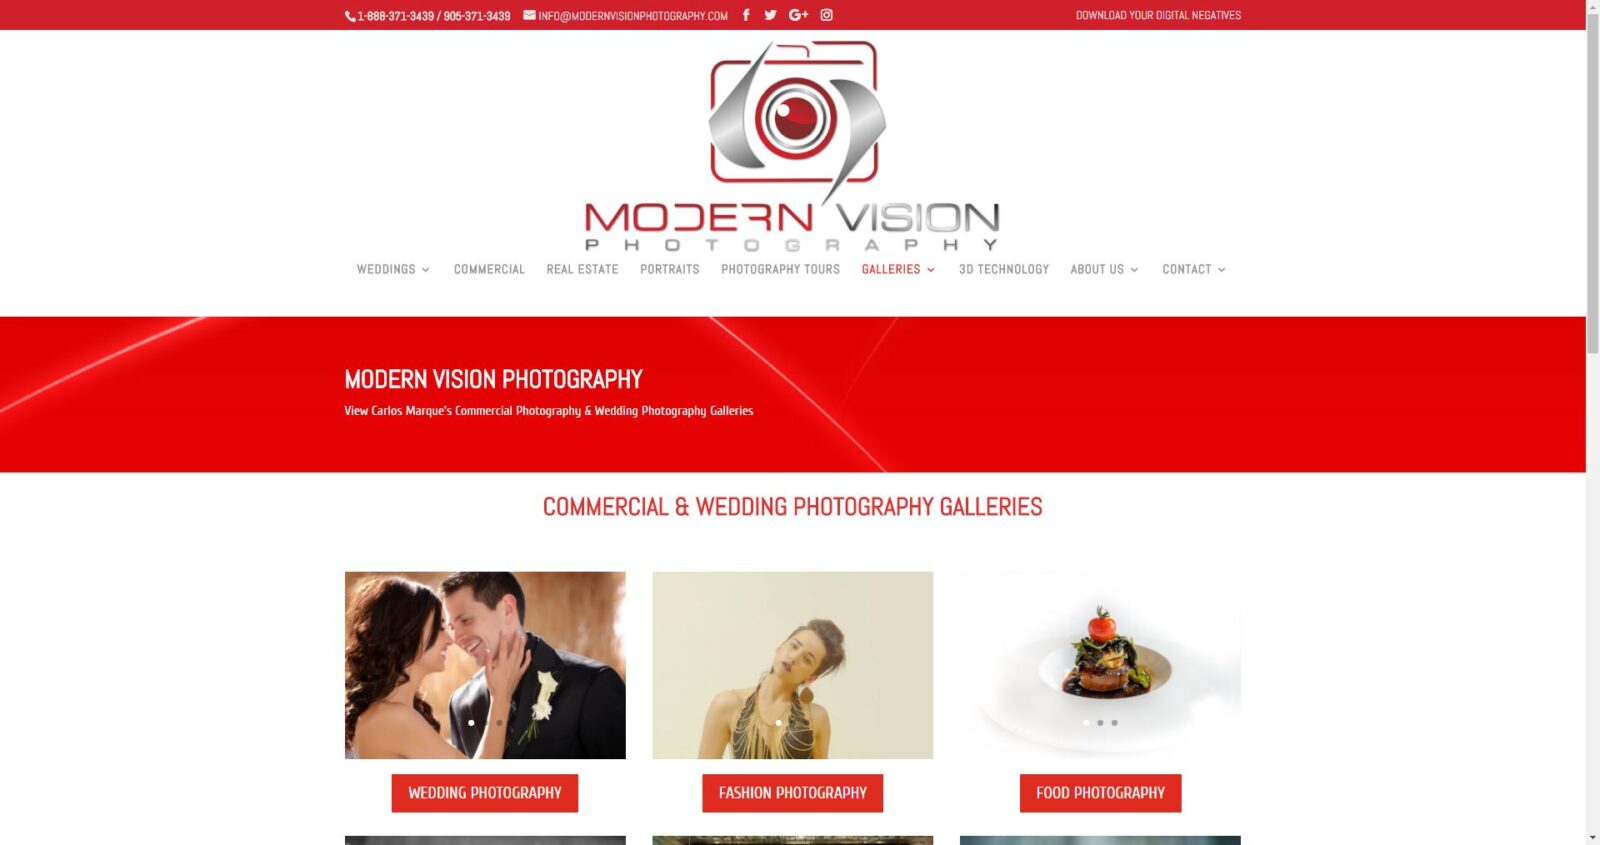 MODERN VISION PHOTOGRAPHY View Carlos Marque's Commercial Photography & Wedding Photography Galleries